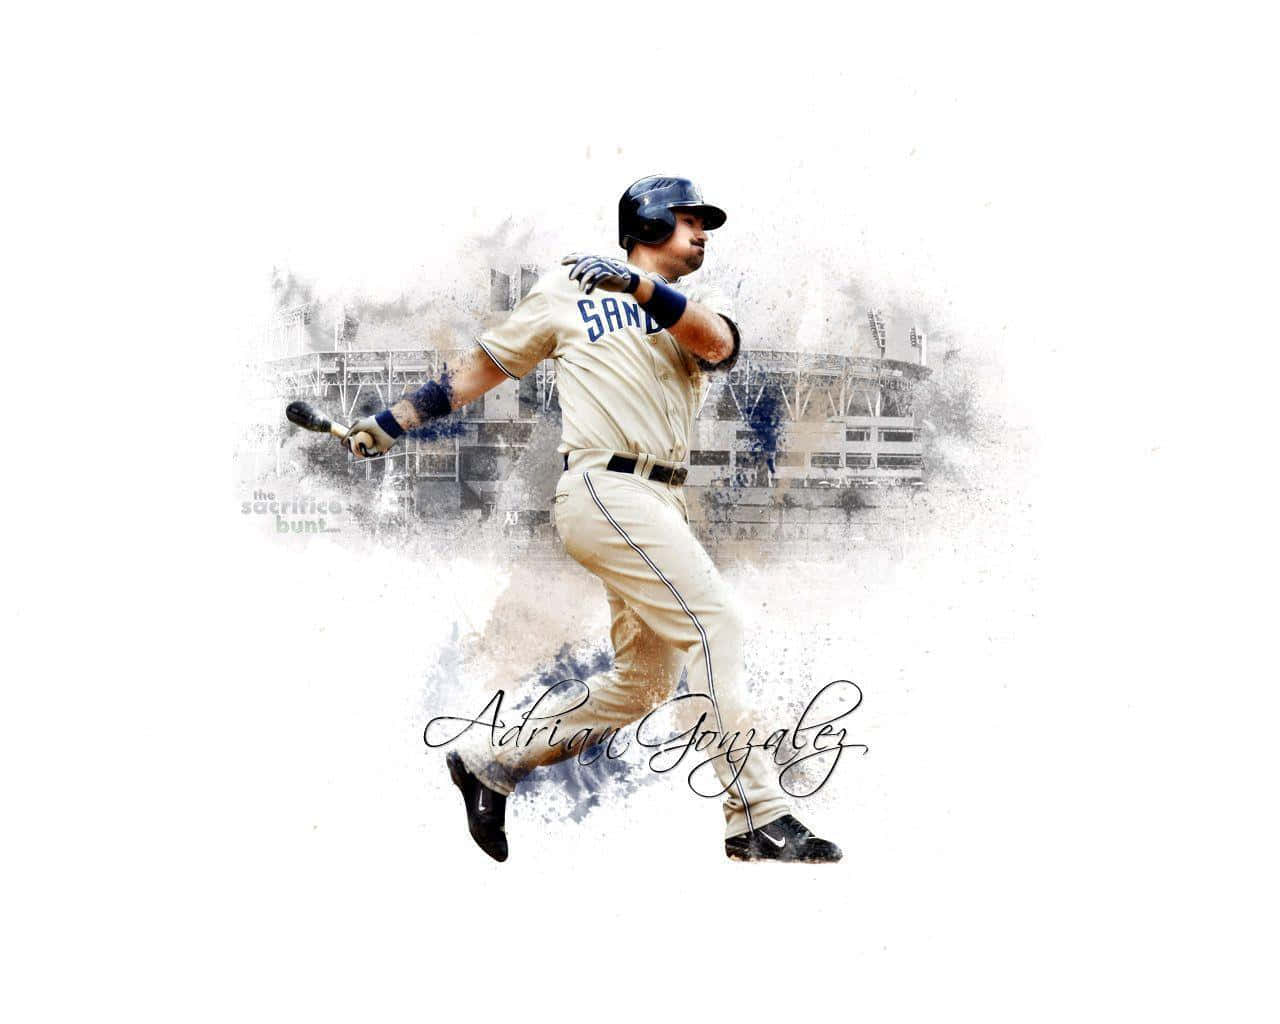 Baseball Player Images  Free Photos, PNG Stickers, Wallpapers